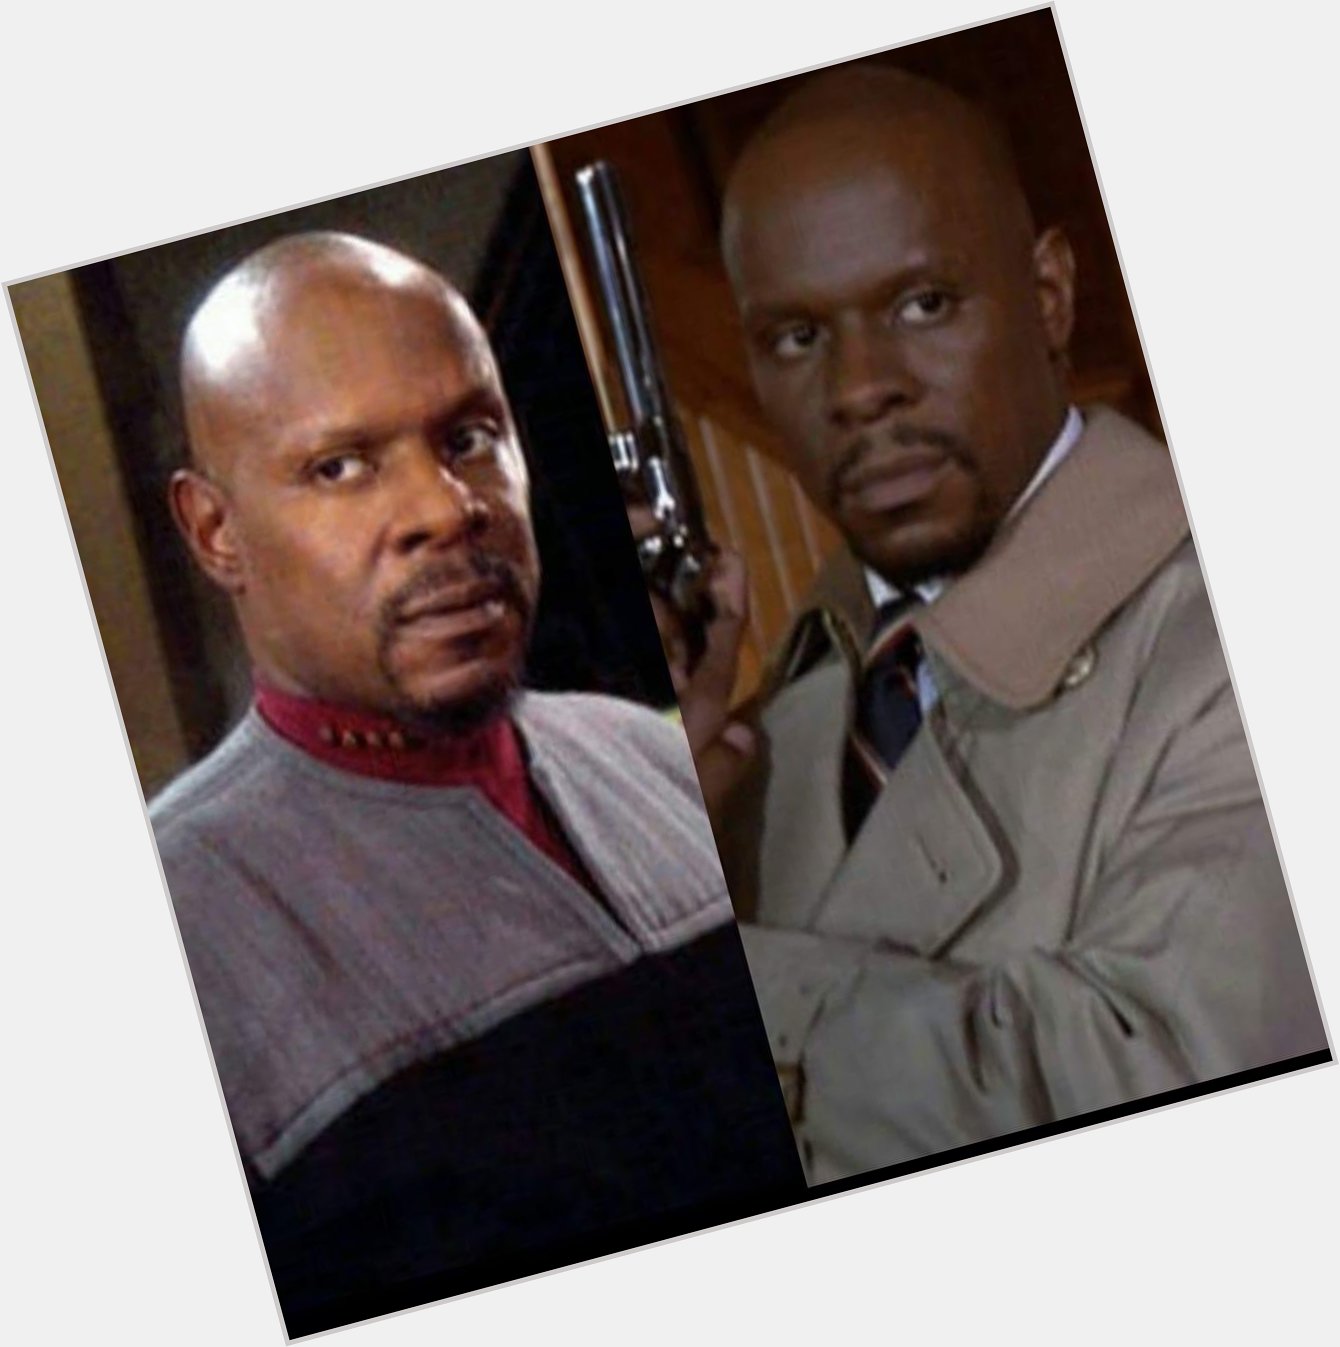 Happy 72nd birthday Avery Brooks! If anyone needs me, I ll be watching Spenser For Hire tonight. 